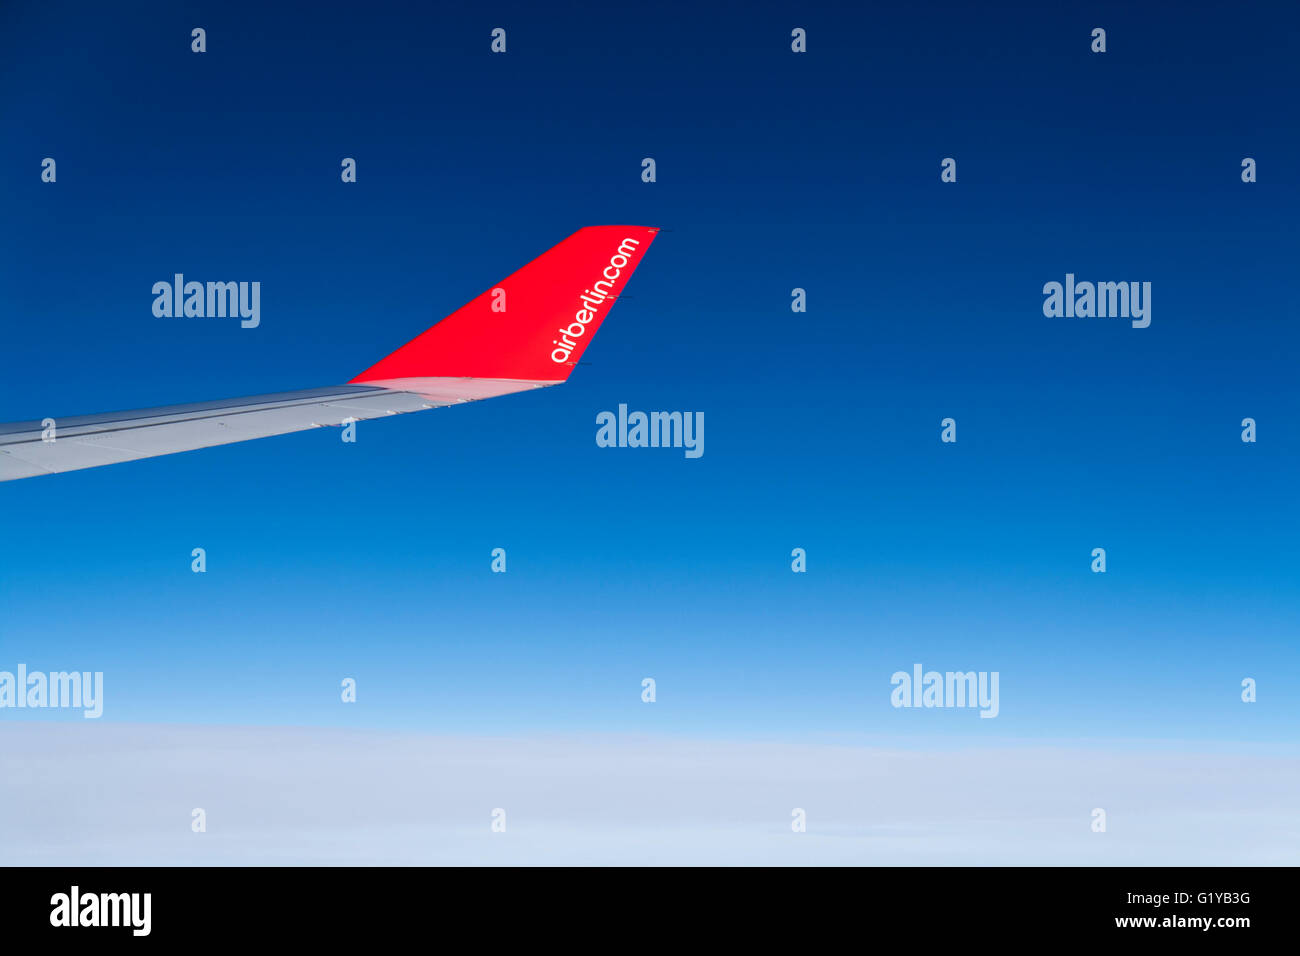 Air Berlin wing showing the airline name on winglet - No Sales on Alamy or anywhere else Stock Photo